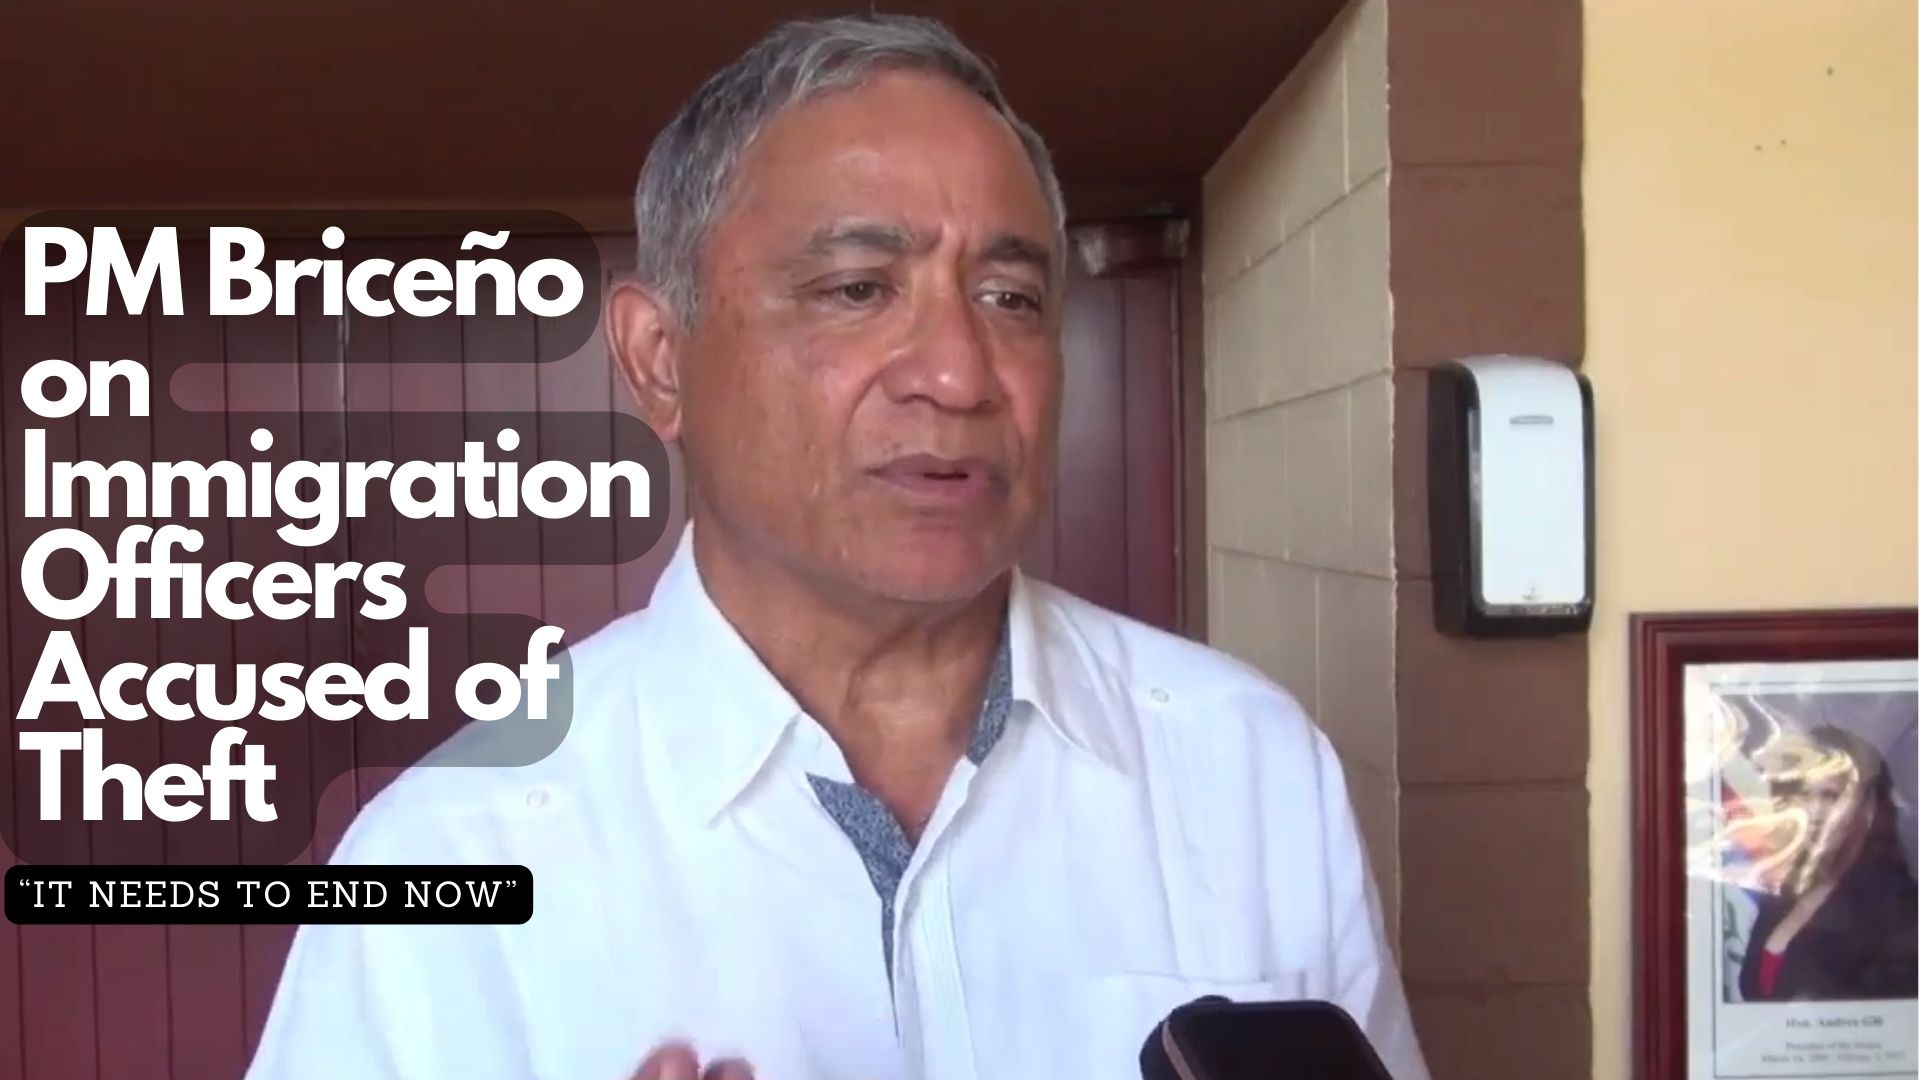 PM Briceño on Immigration Officers Accused of Theft